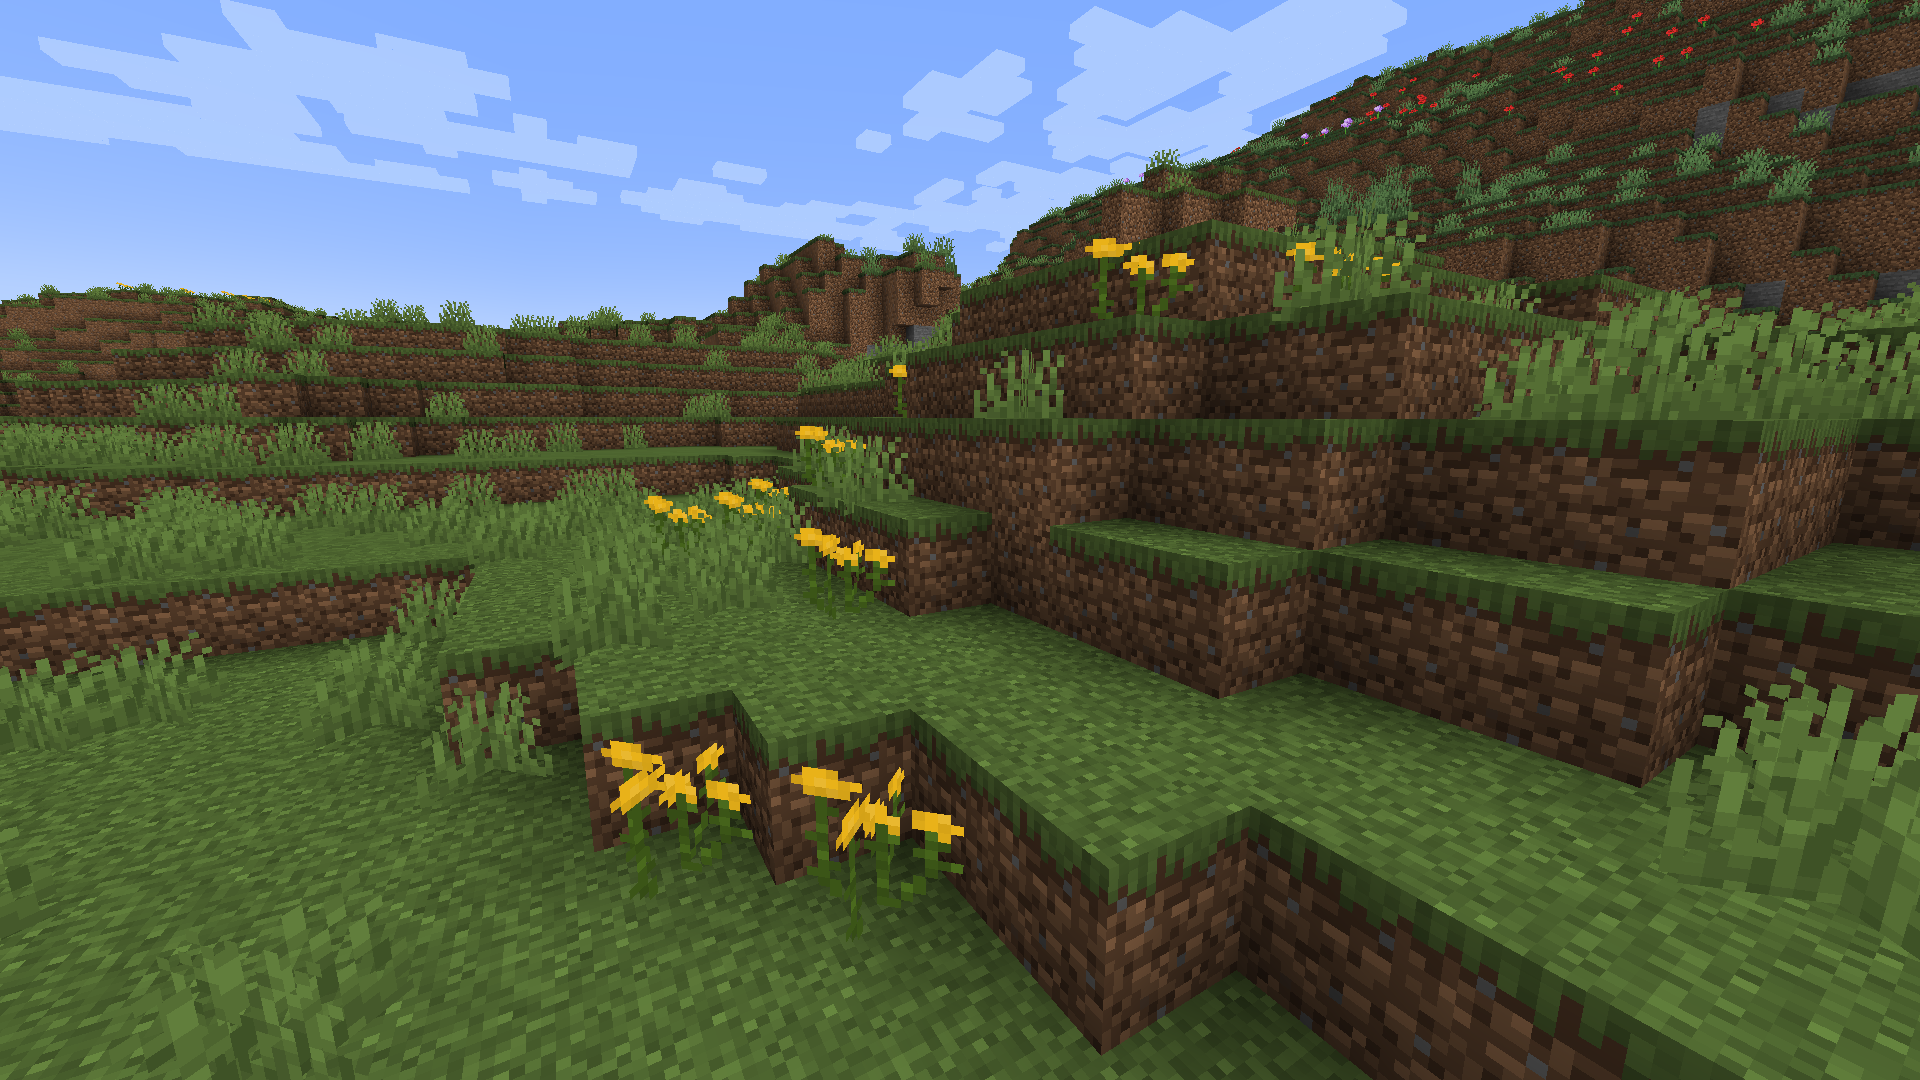 Tansies in a plains biome (2.0)